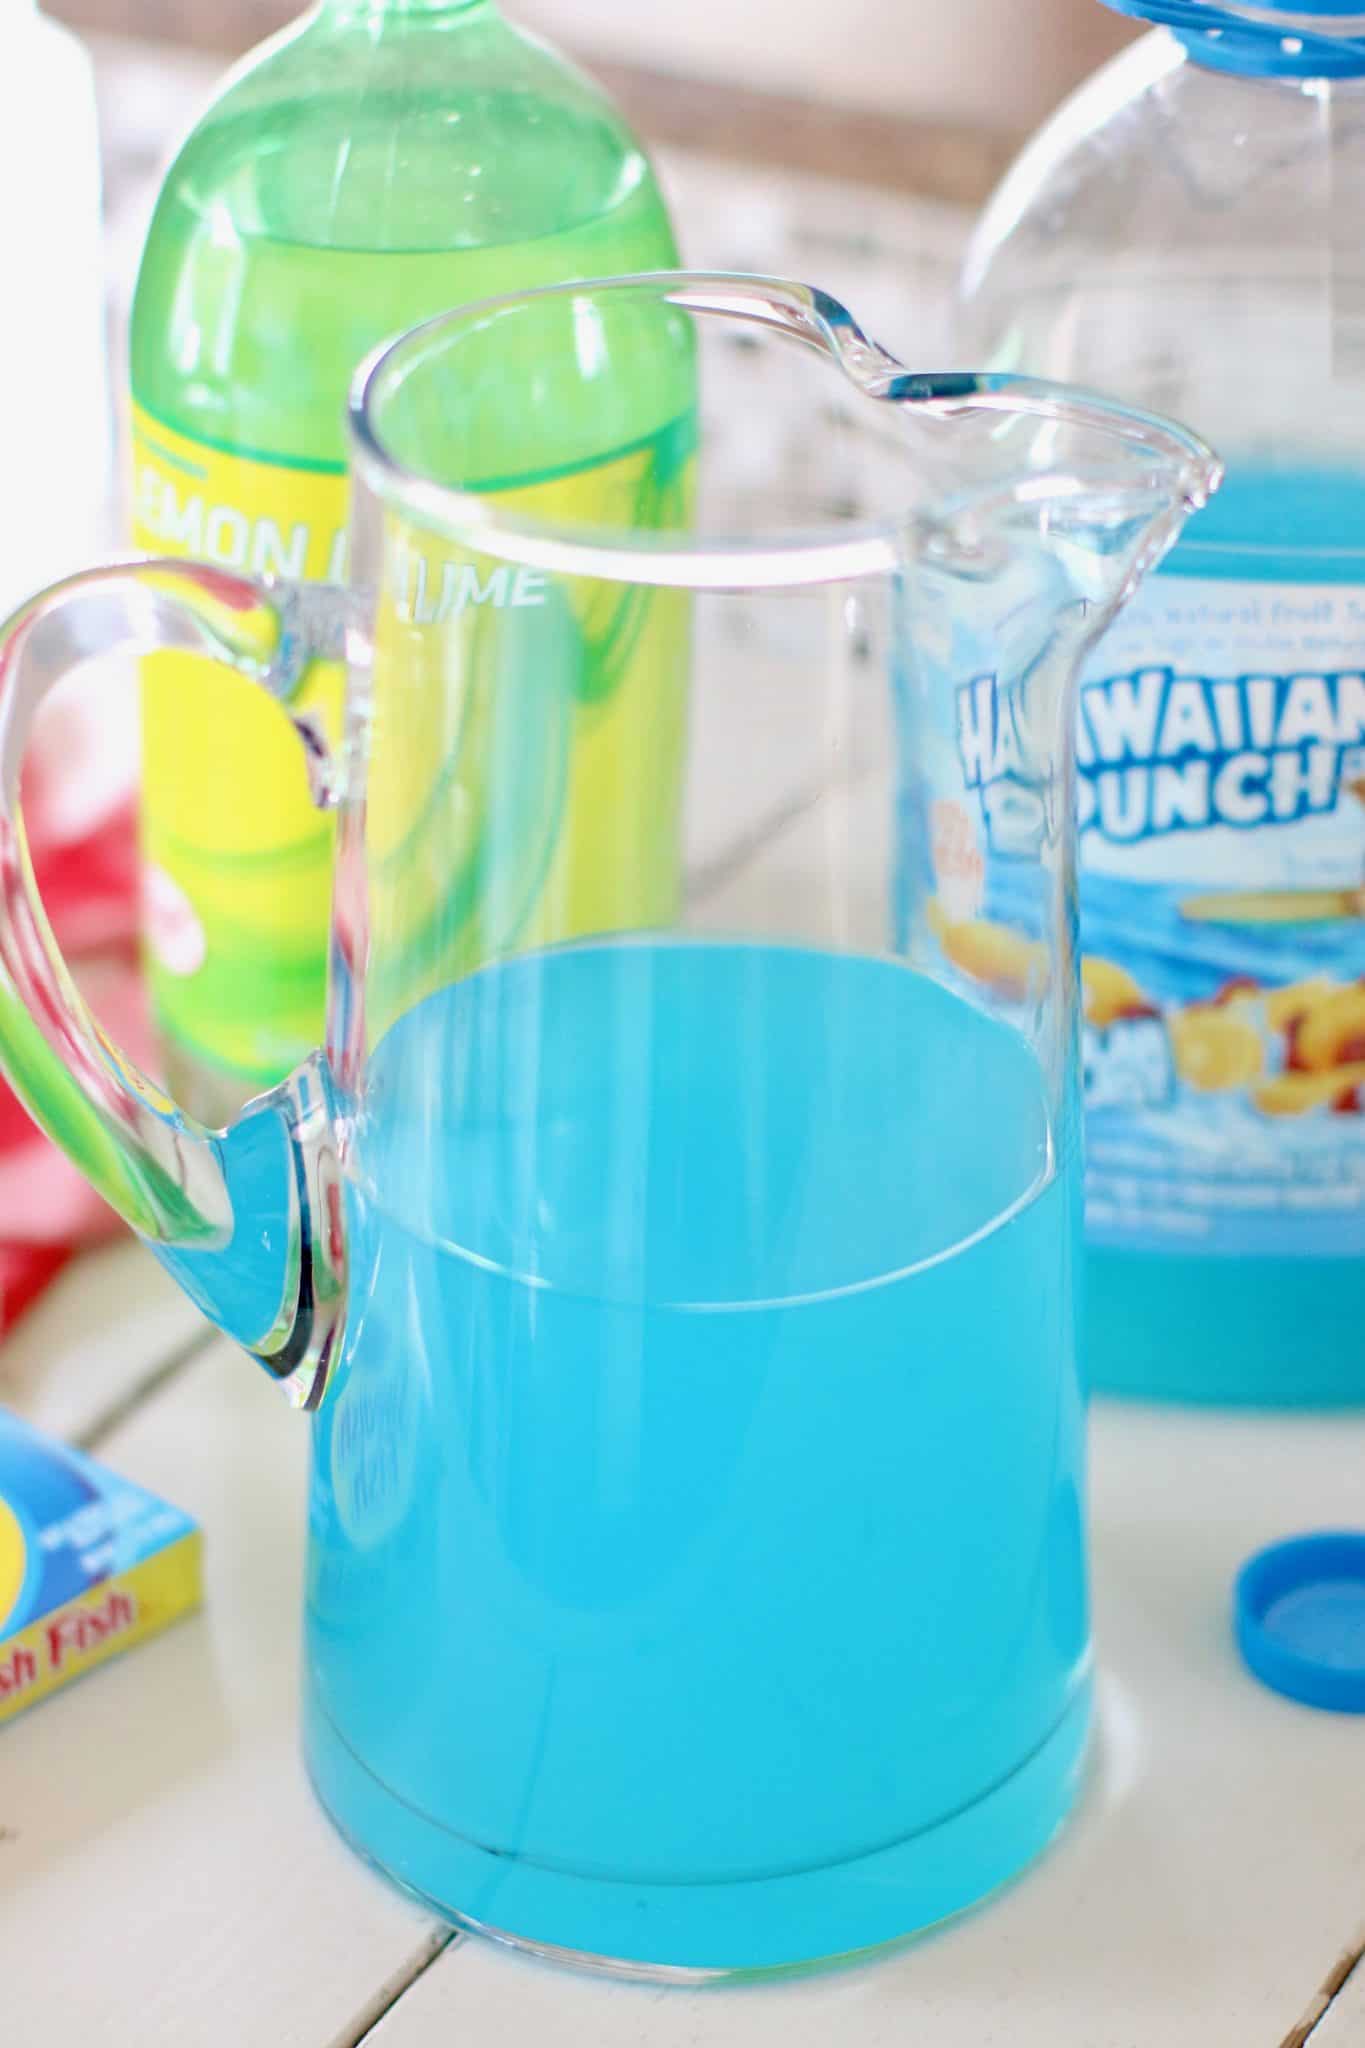 blue Hawaiian Punch punch poured into a large glass pitcher.